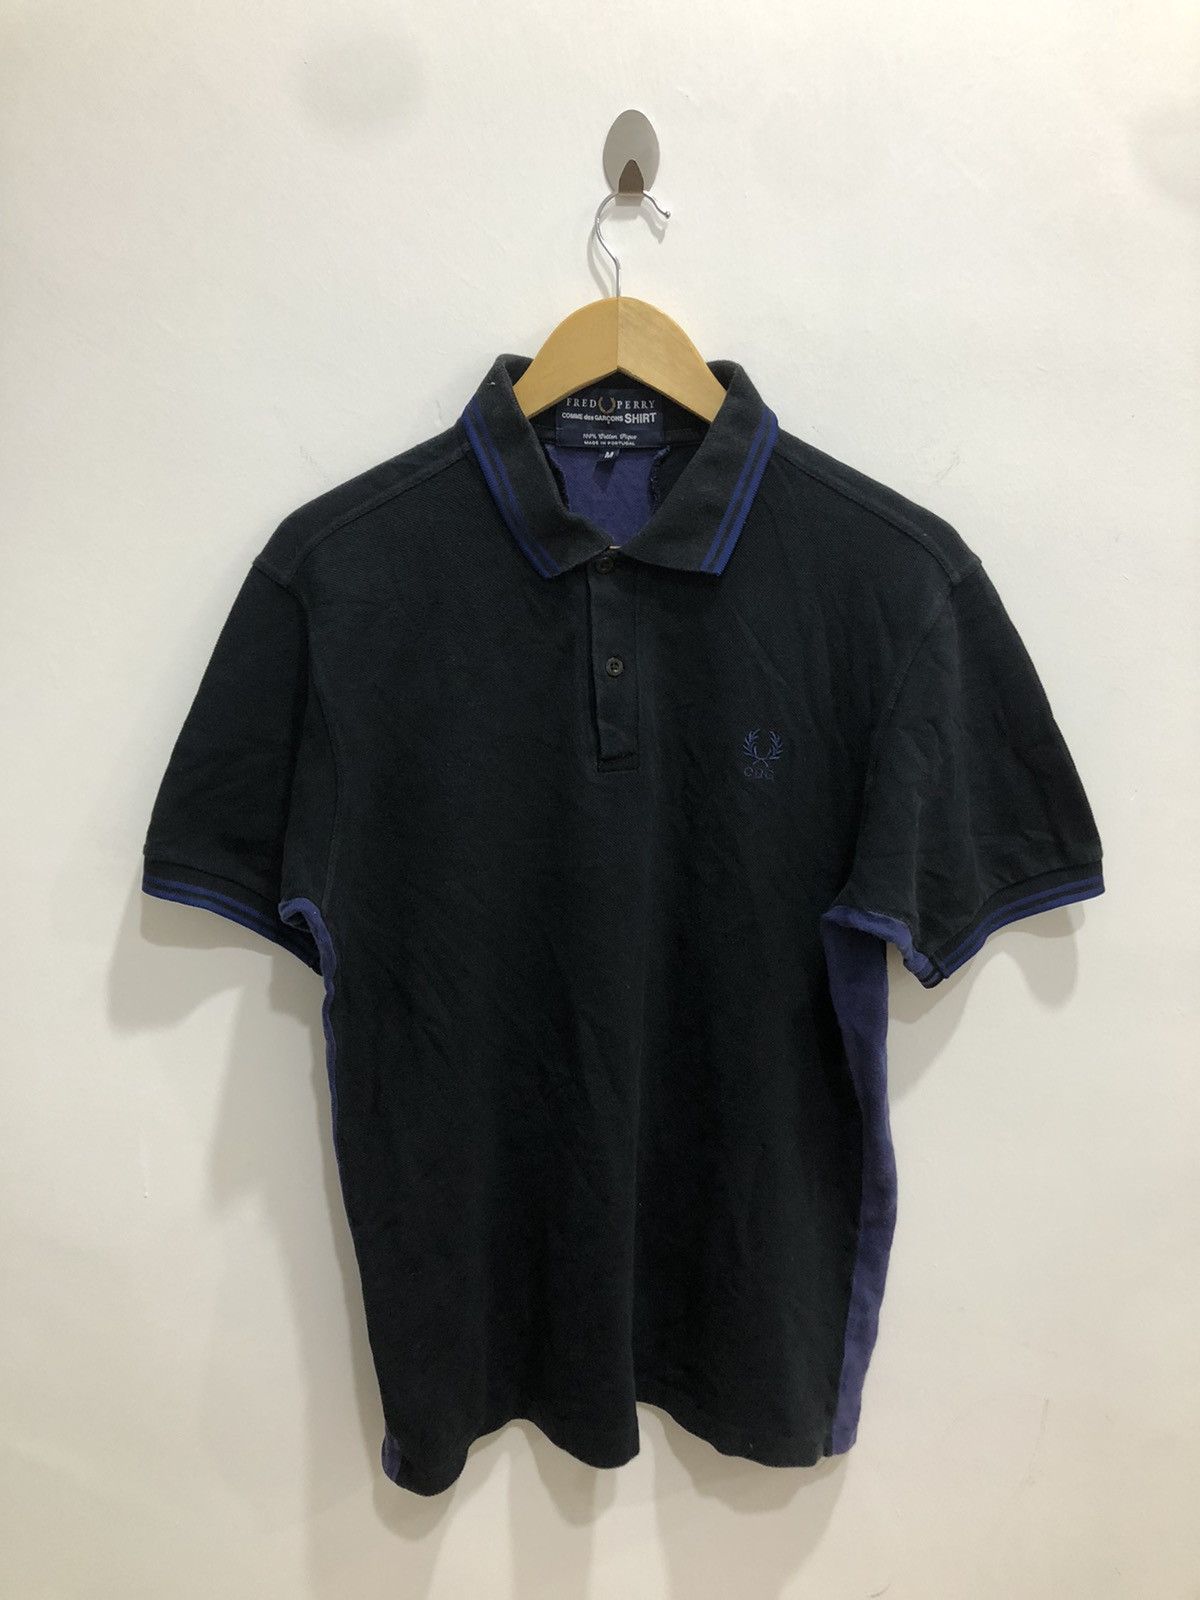 SS04 CDG x Fred Perry Polo Shirt - 1